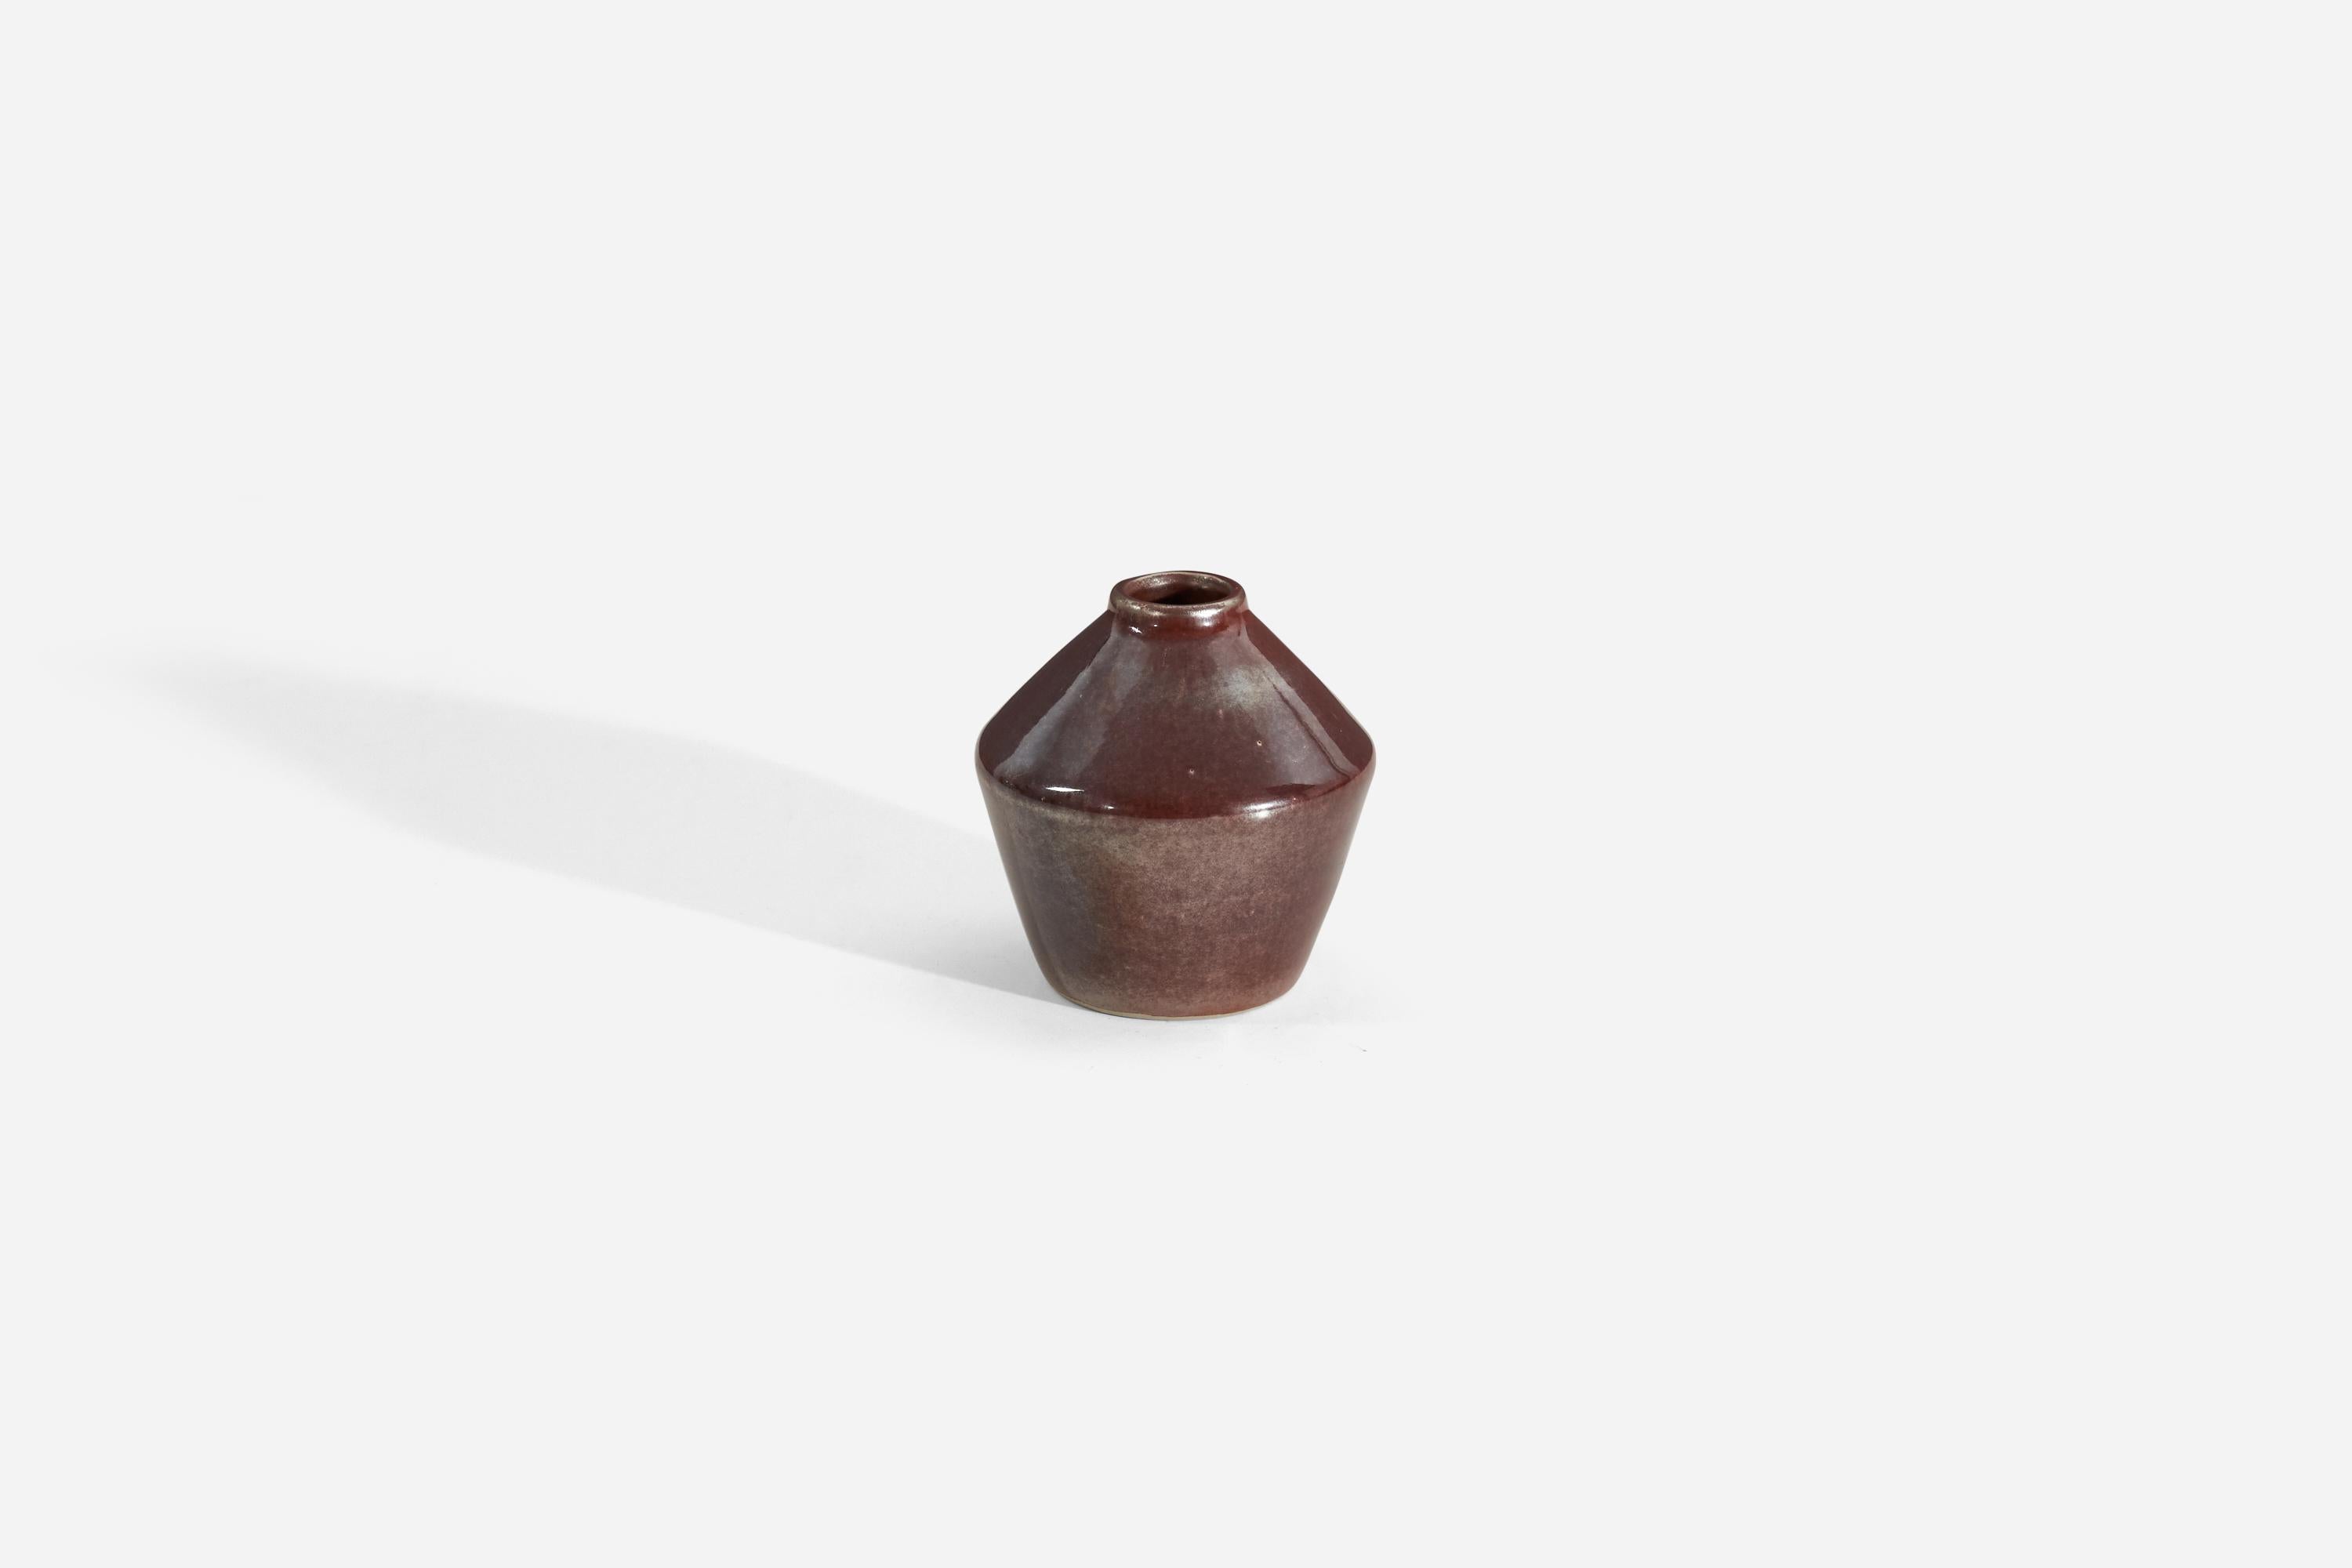 A reddish-brown glazed stoneware vase designed and produced by Carl-Harry Stålhane. Produced by Rörstrand, Sweden, 1960s.